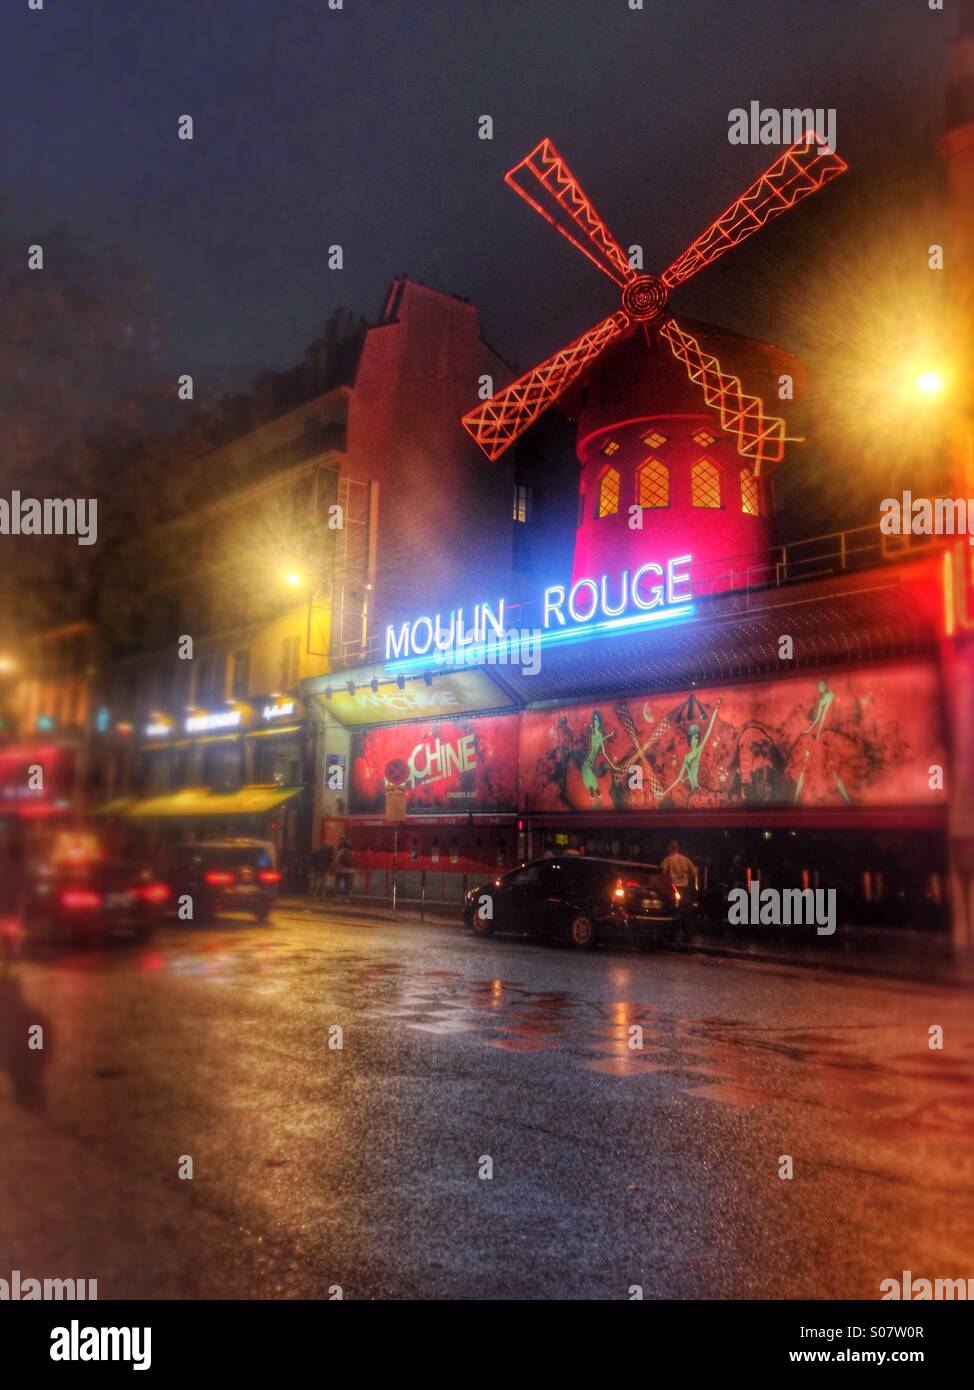 The Moulin Rouge cabaret in Paris, France. Stock Photo